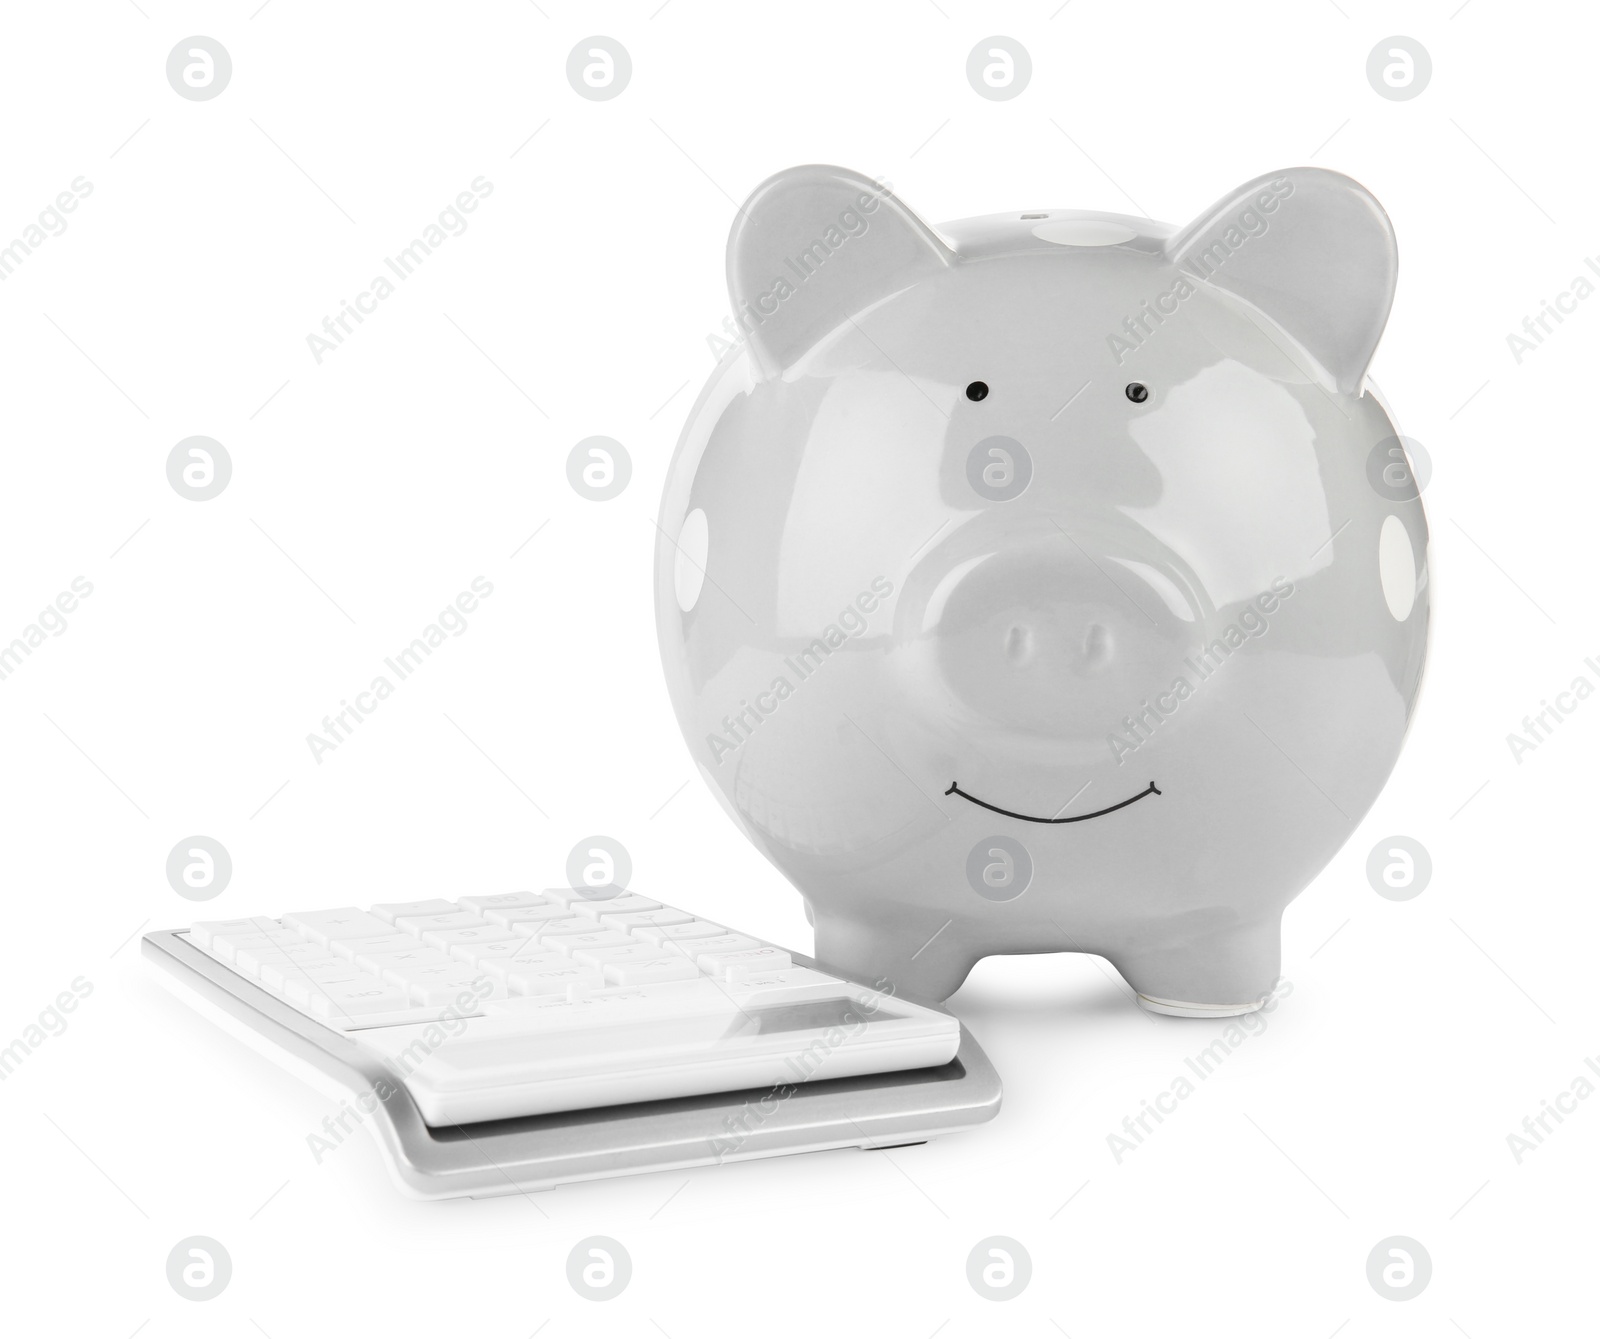 Photo of Calculator and grey piggy bank isolated on white